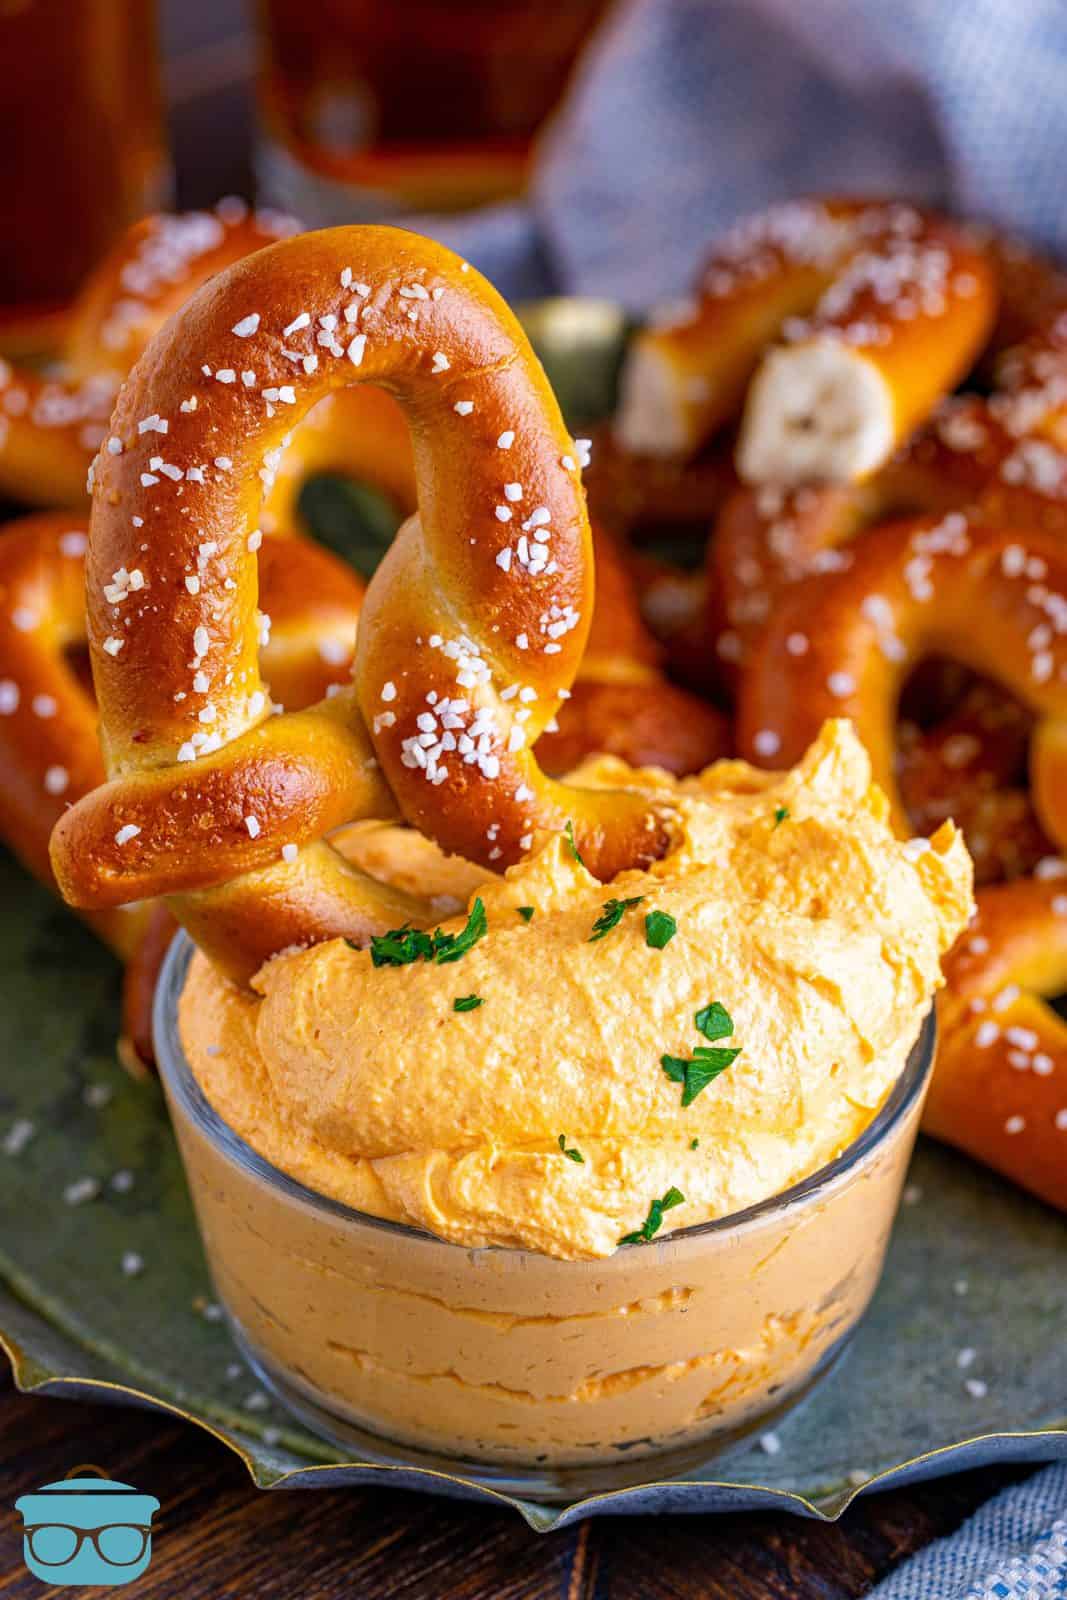 One pretzel sticking out of bowl of Beer Cheese Dip.